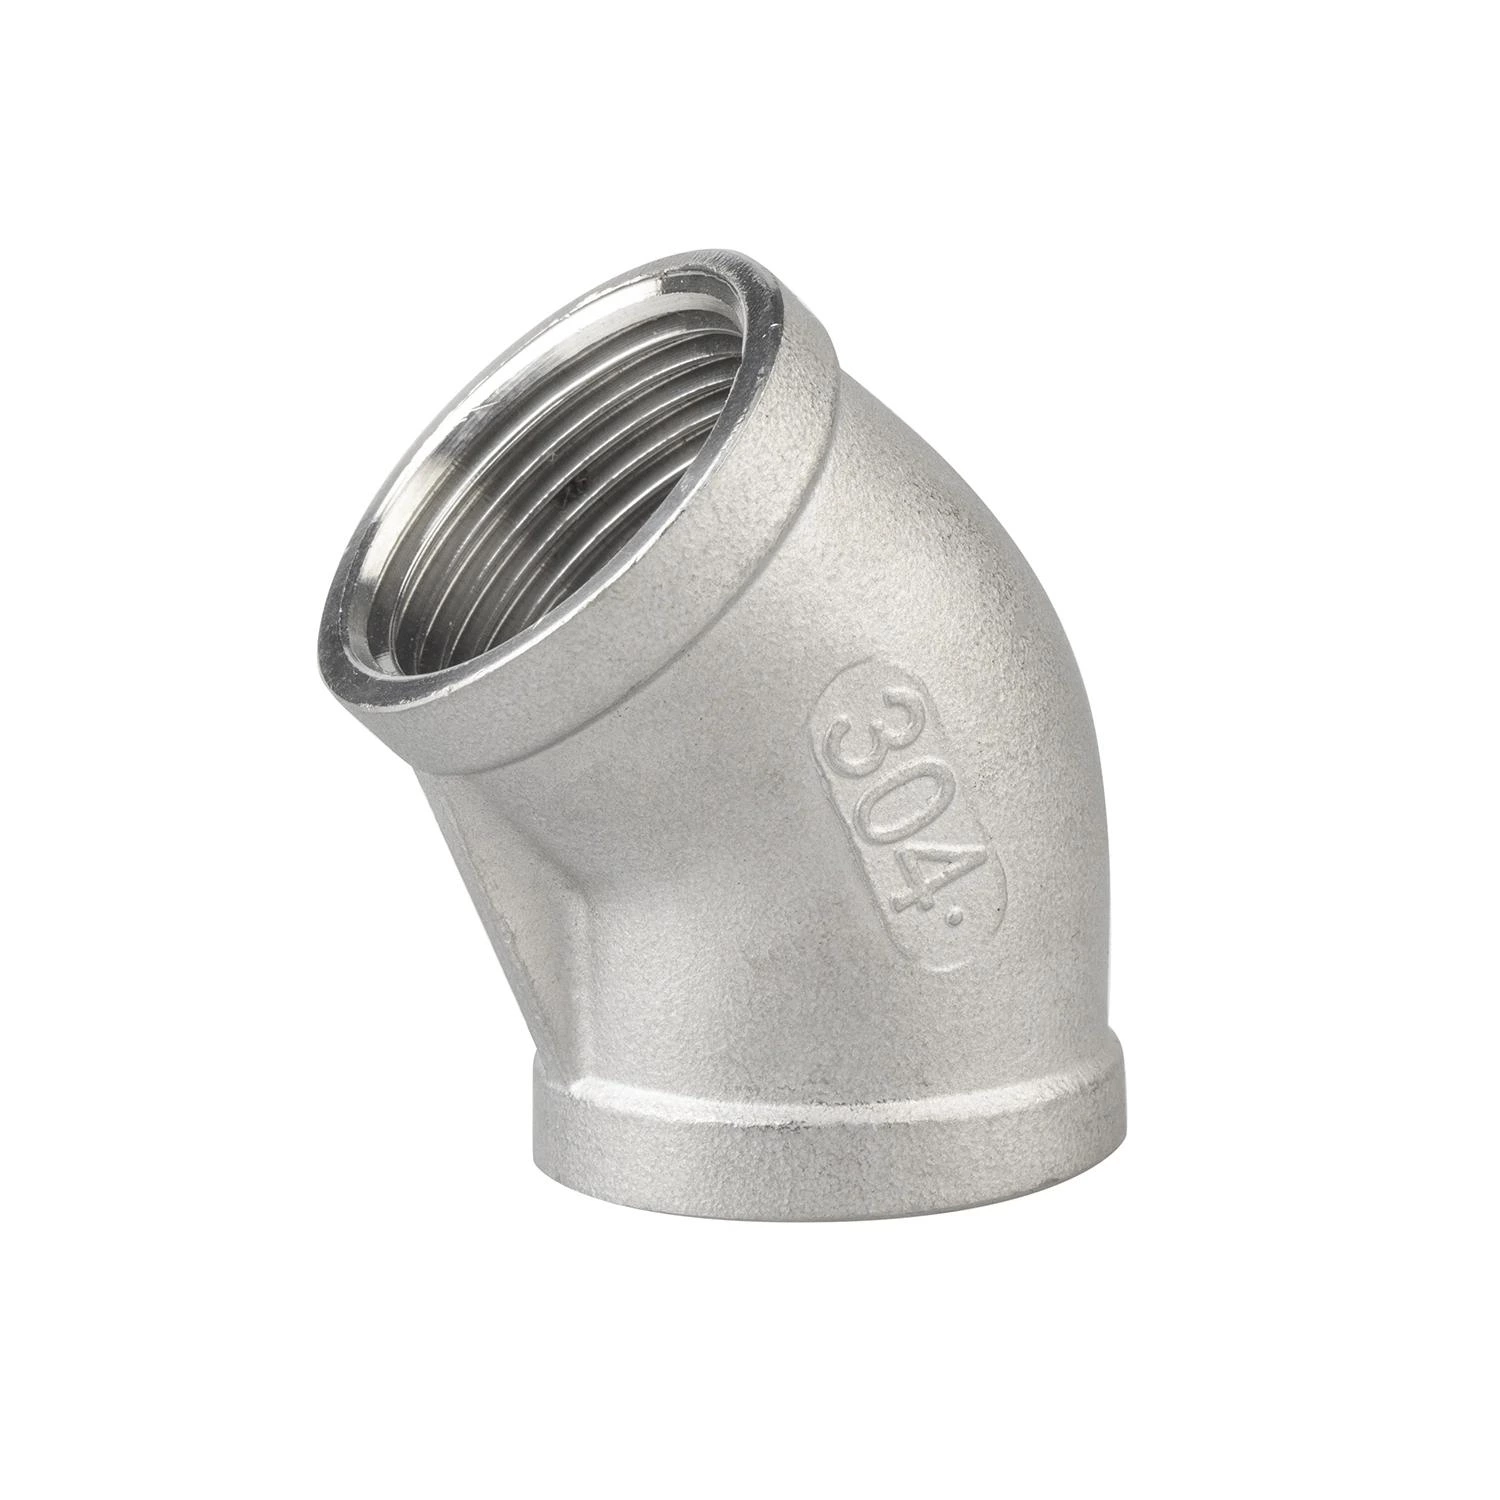 Stainless Steel Pipe Fittings 304 2" NPT/BSPT Threaded 45 Degree Elbow